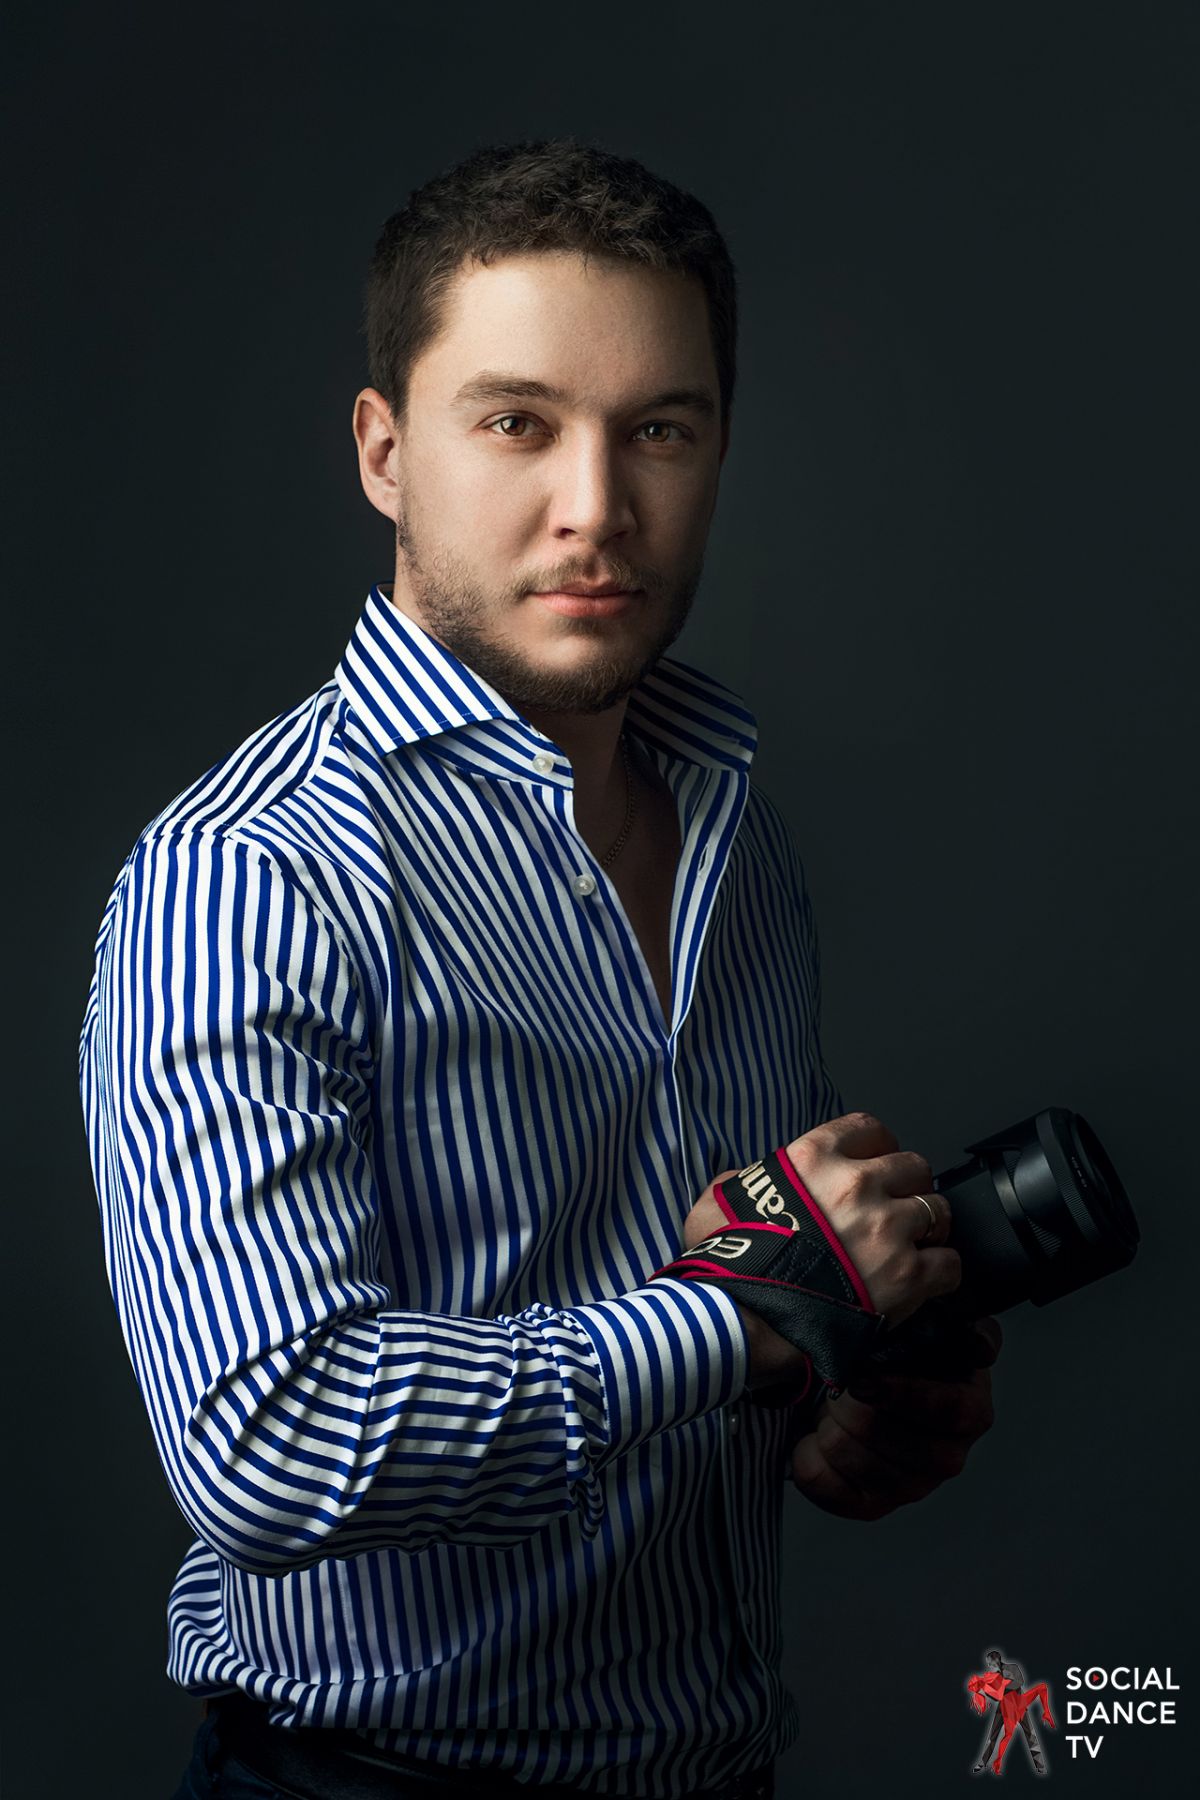 Kirill Korshikov is the creator and founder of award-winning Social Dance TV video company and a talented videographer